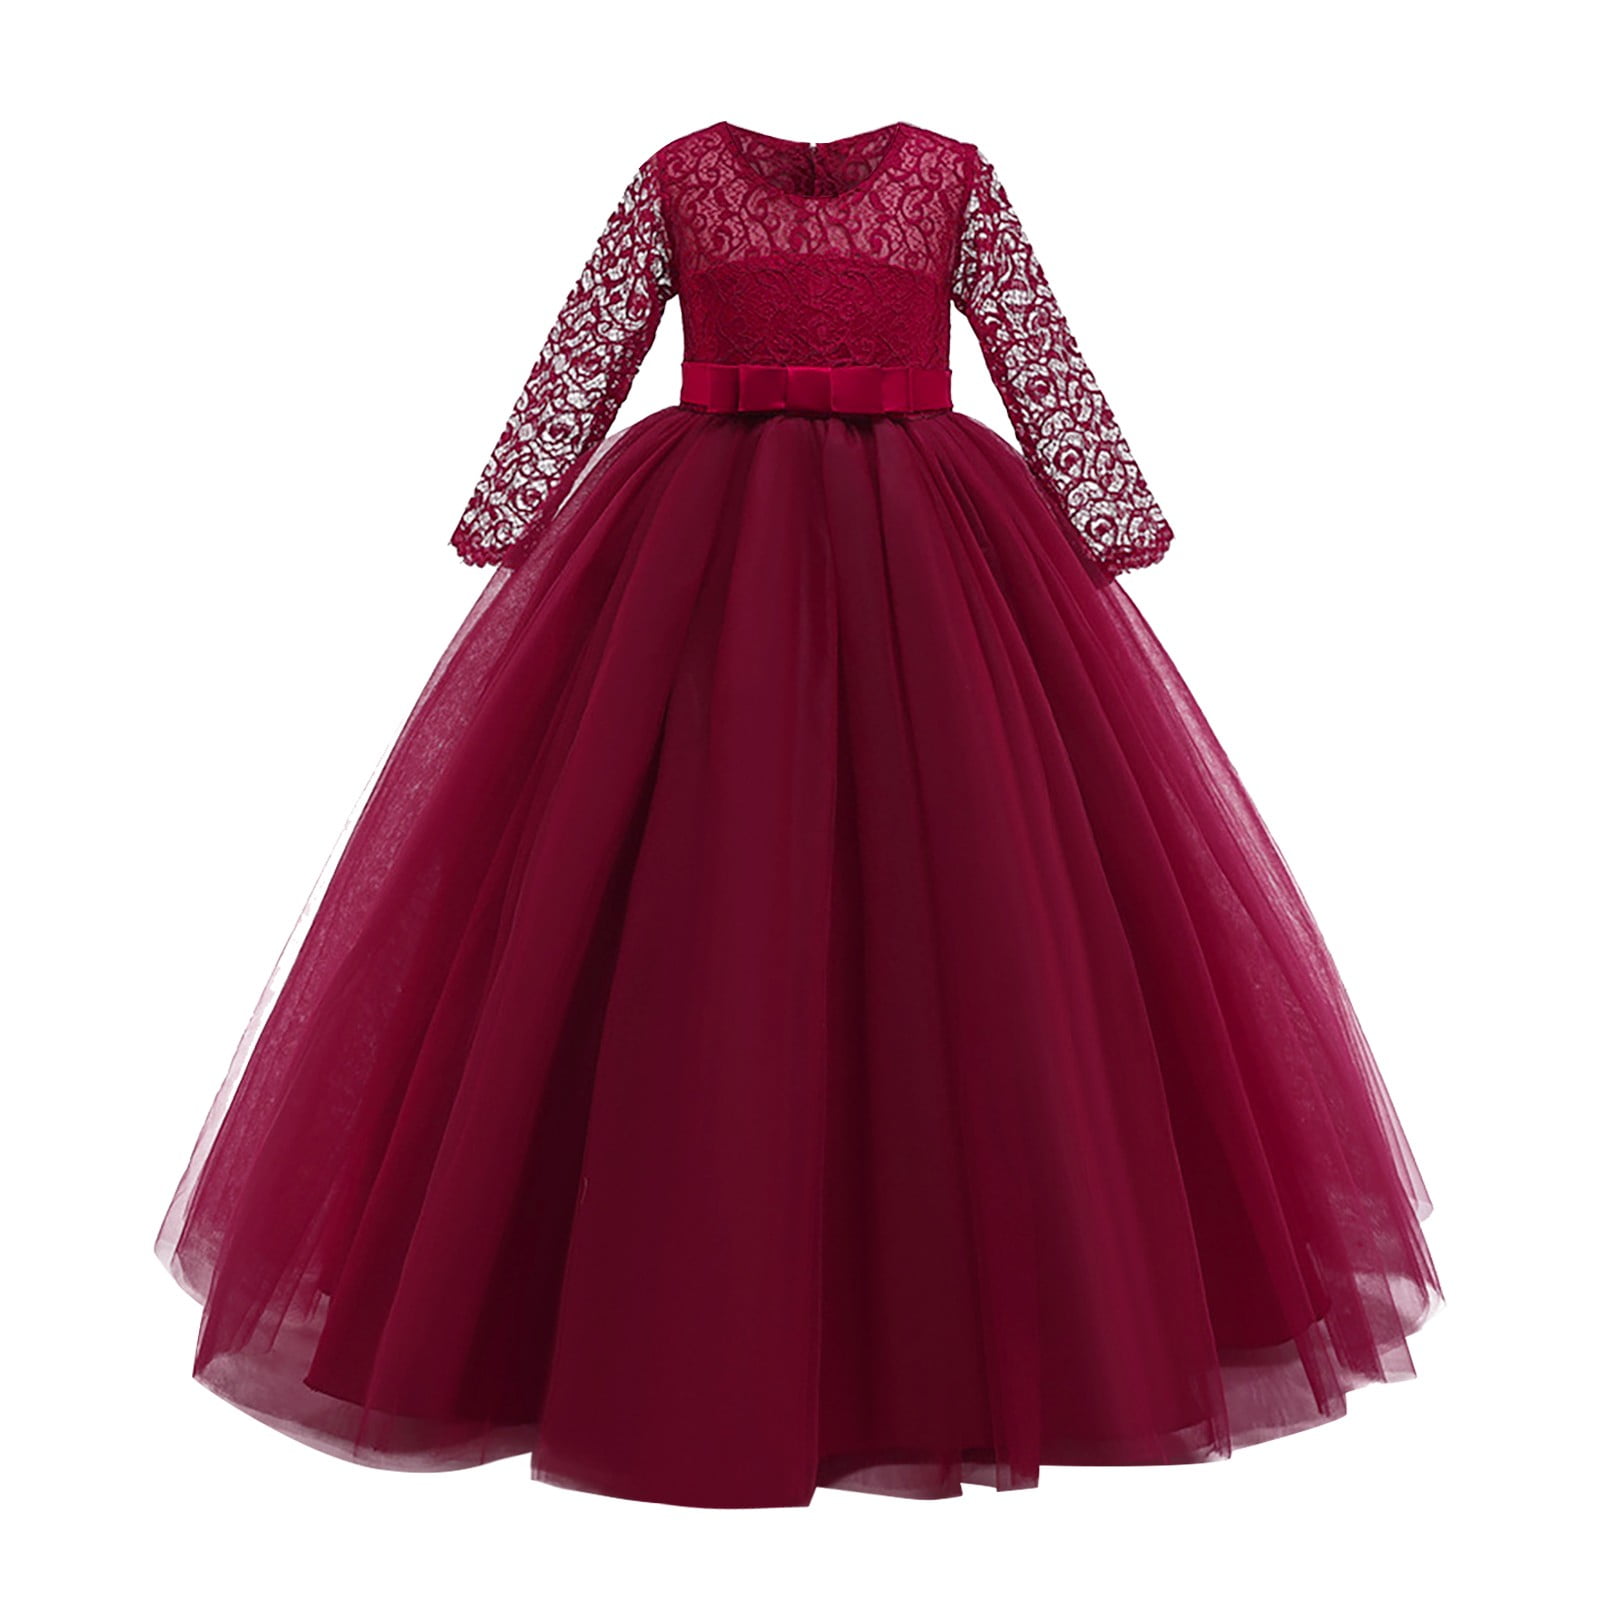 Party Dress for kids and teen girls New Fashion Swing Frocks